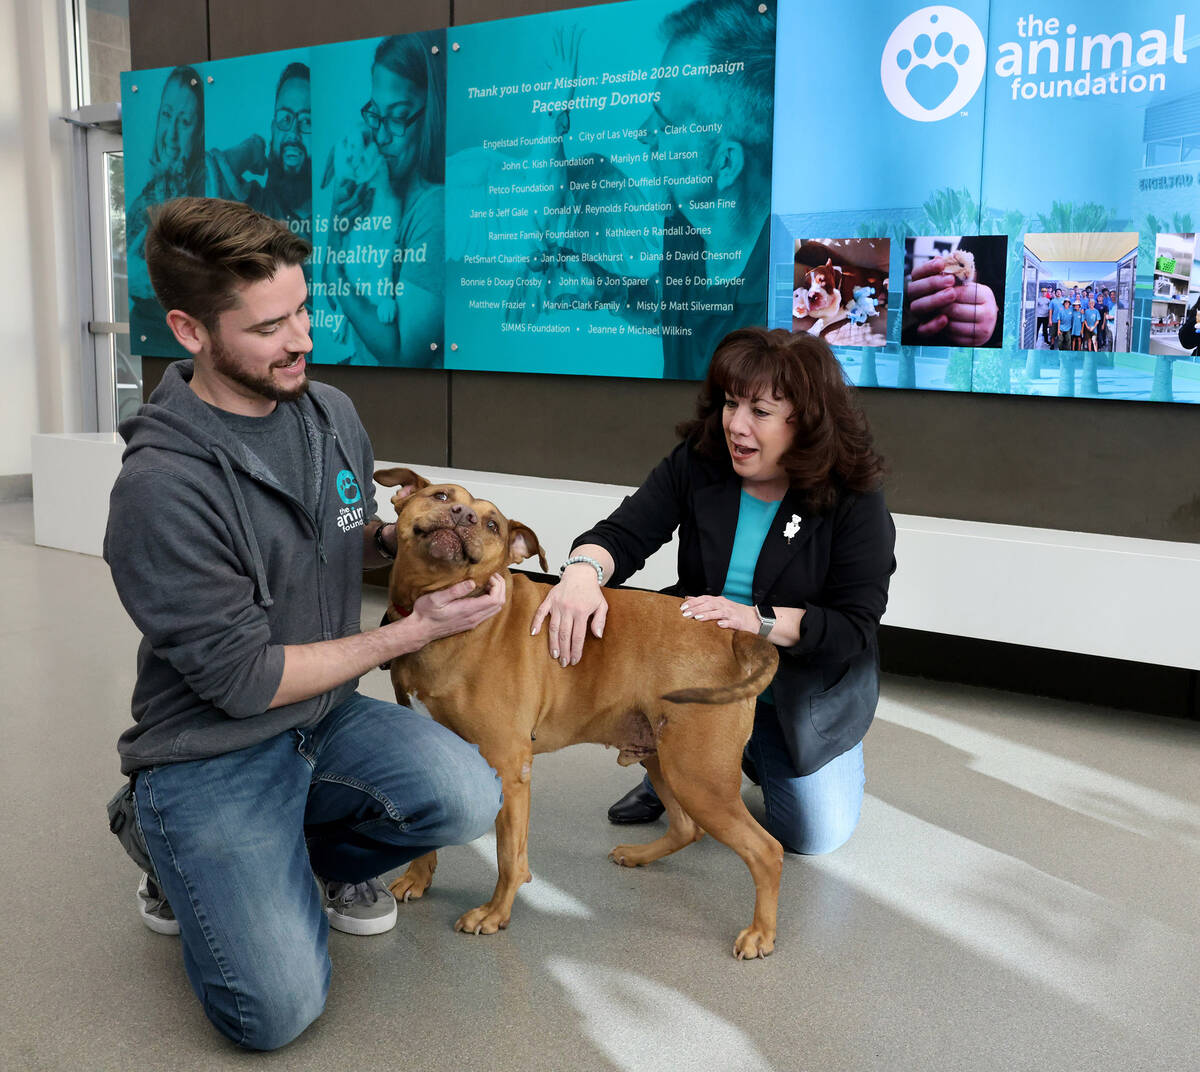 The Animal Foundation Marketing and Communications Coordinator Max Blaustein and CEO Hilarie Gr ...